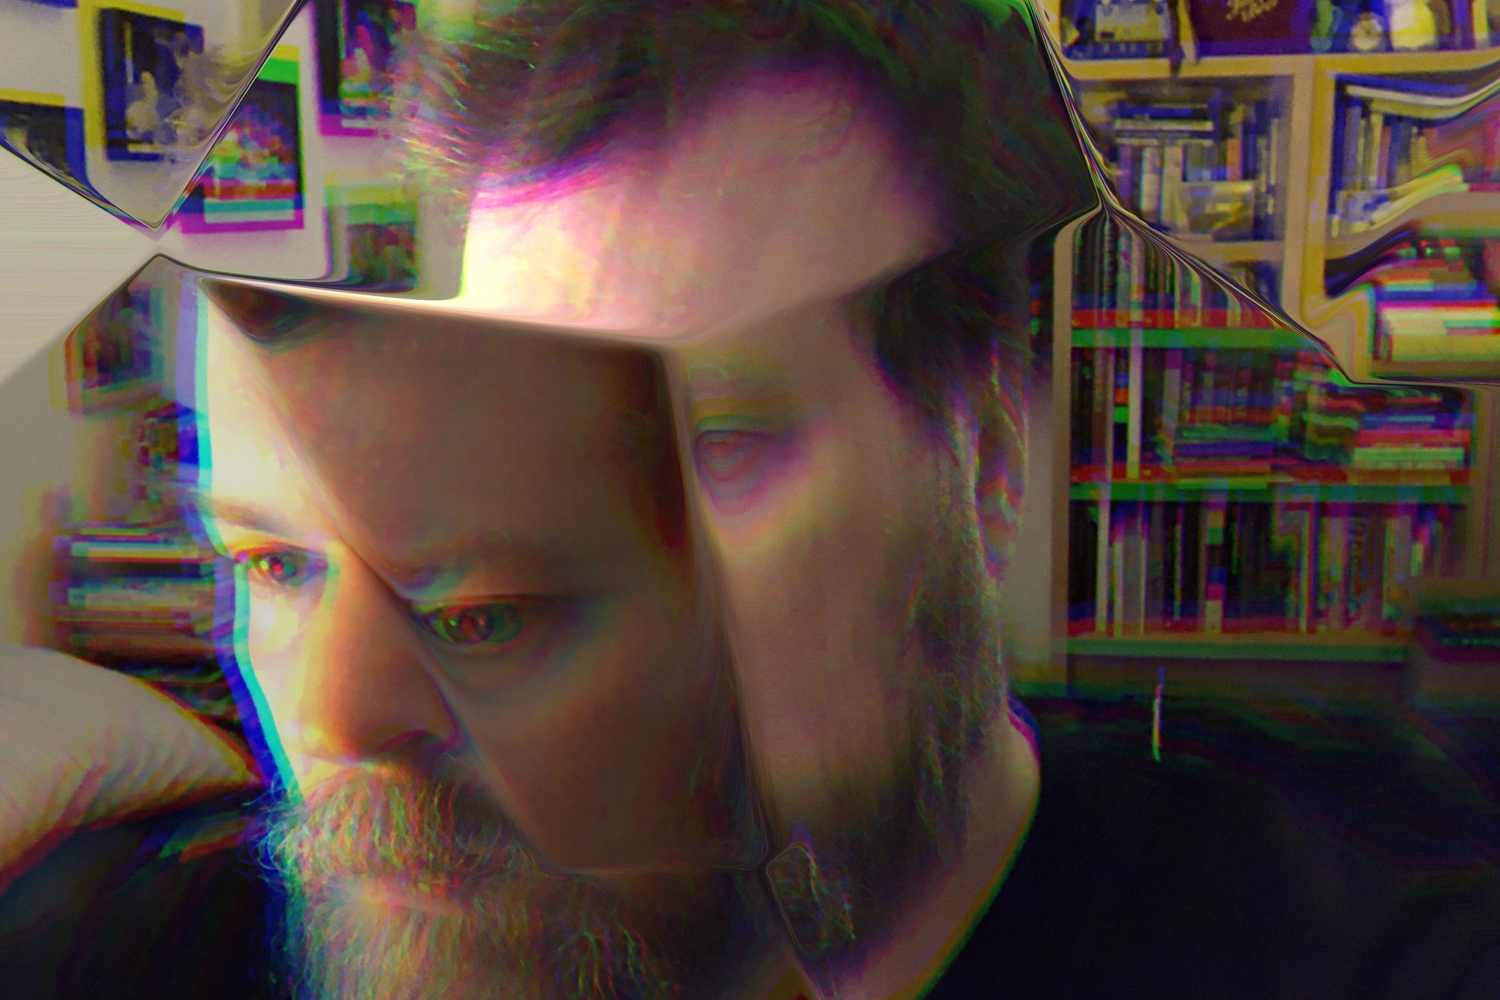 John Grant reveals new song ‘The Only Baby’